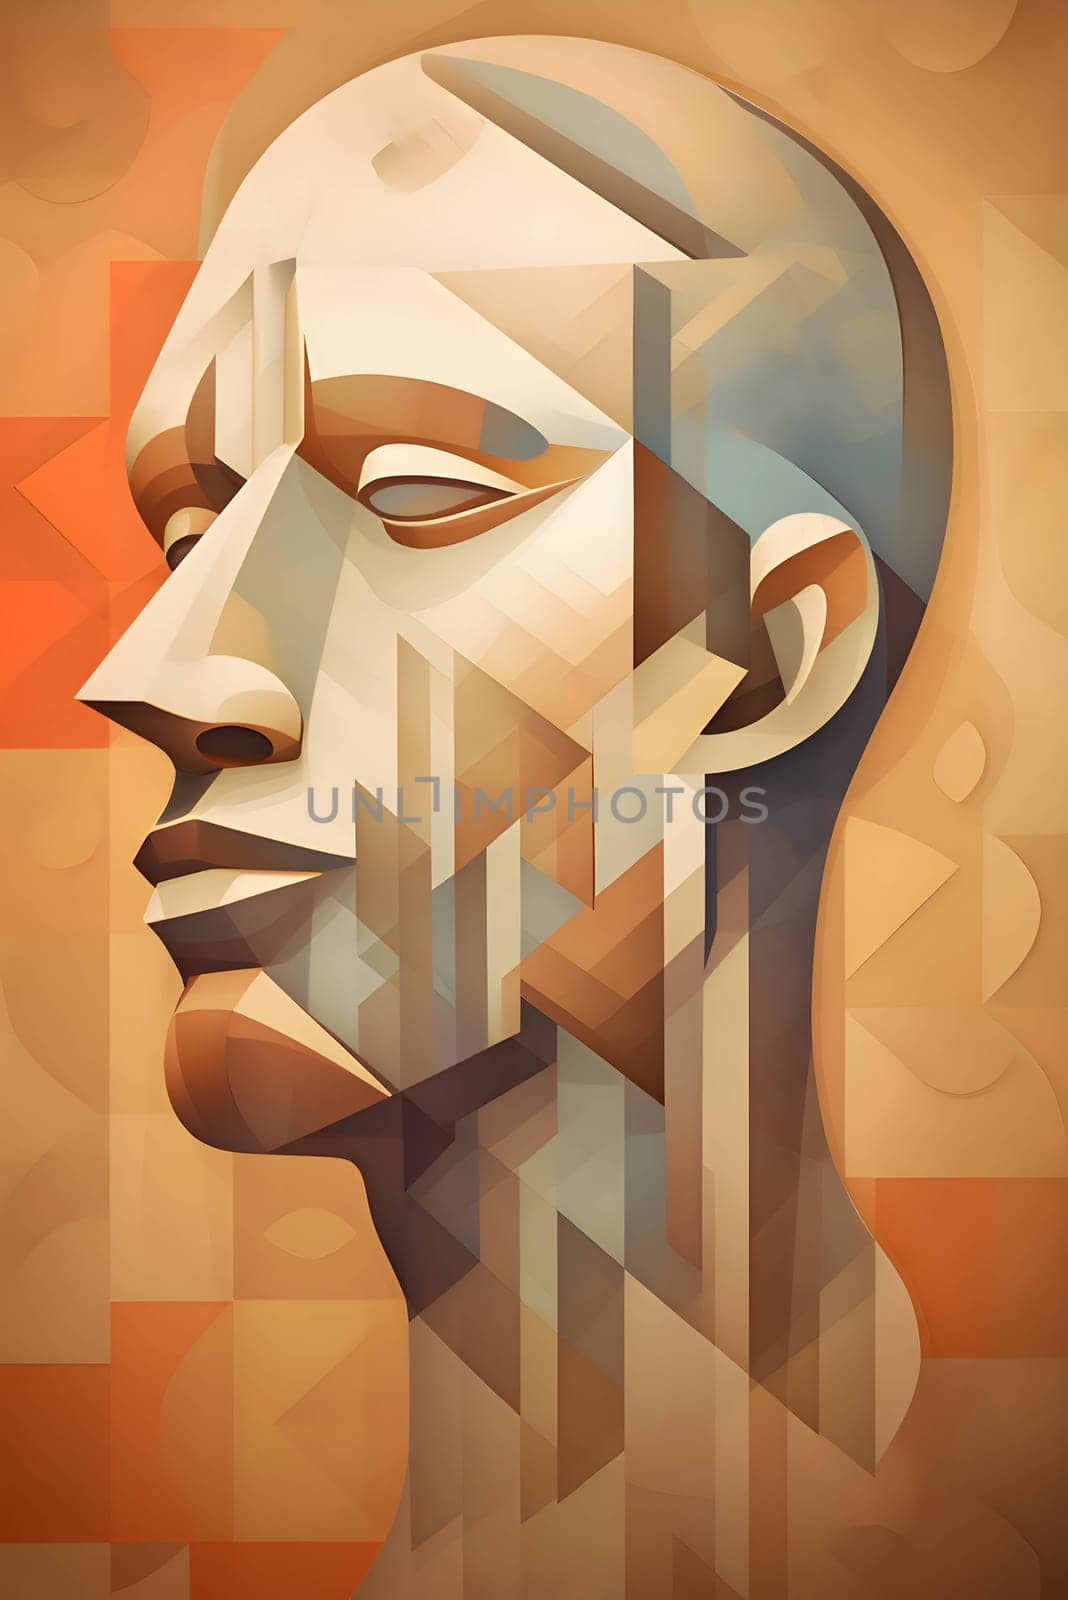 Abstract illustration: Abstract man head in profile, polygonal style. Vector illustration.